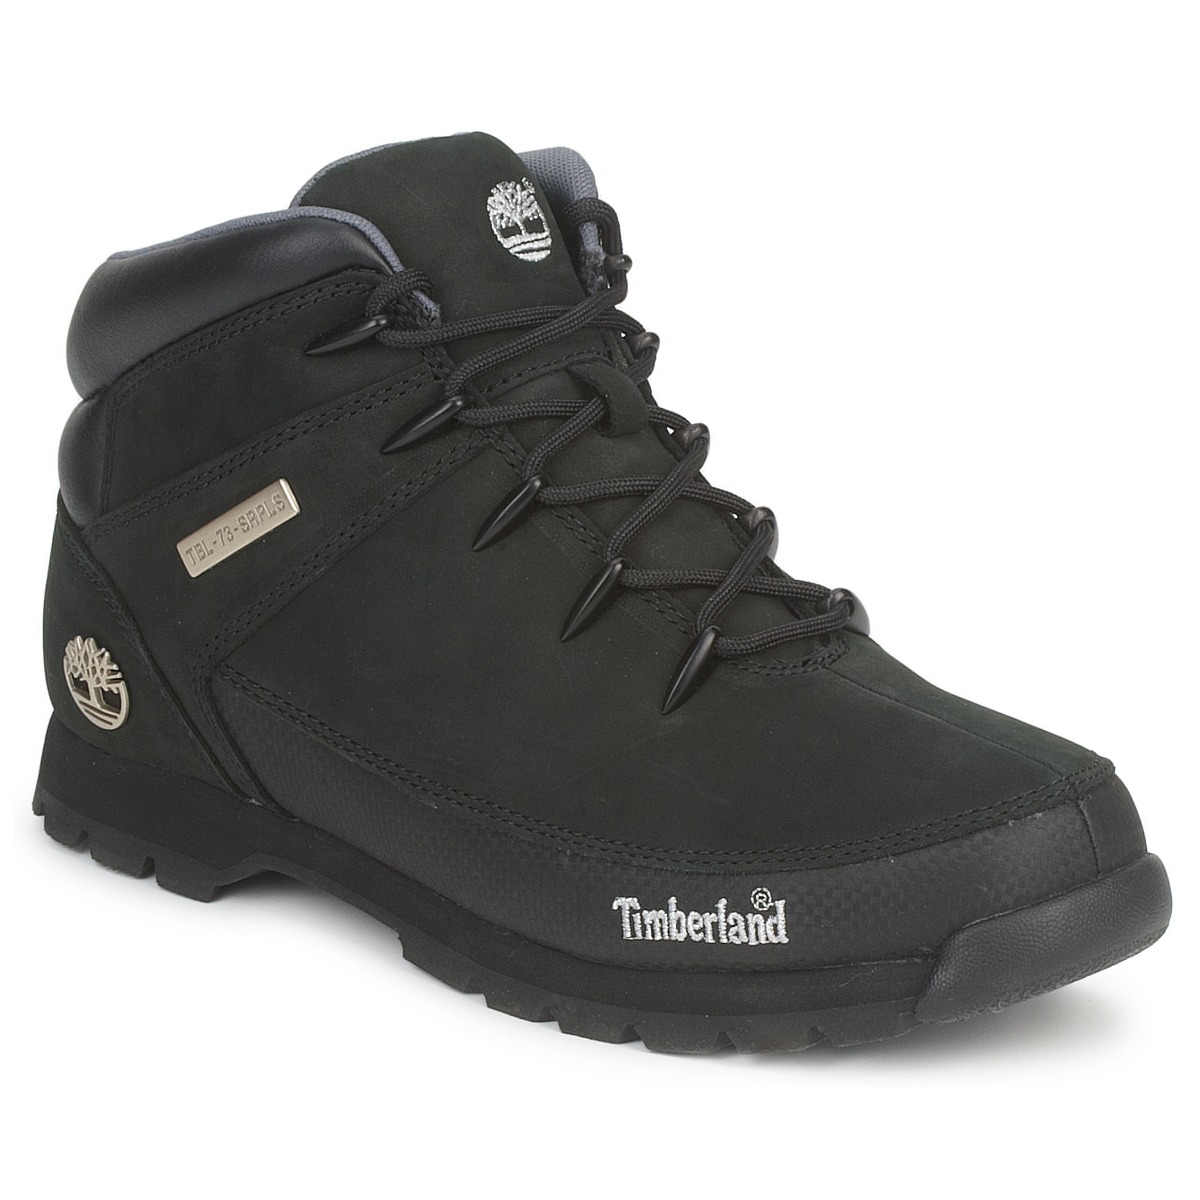 Timberland EURO SPRINT Black - Free Delivery with Rubbersole.co.uk